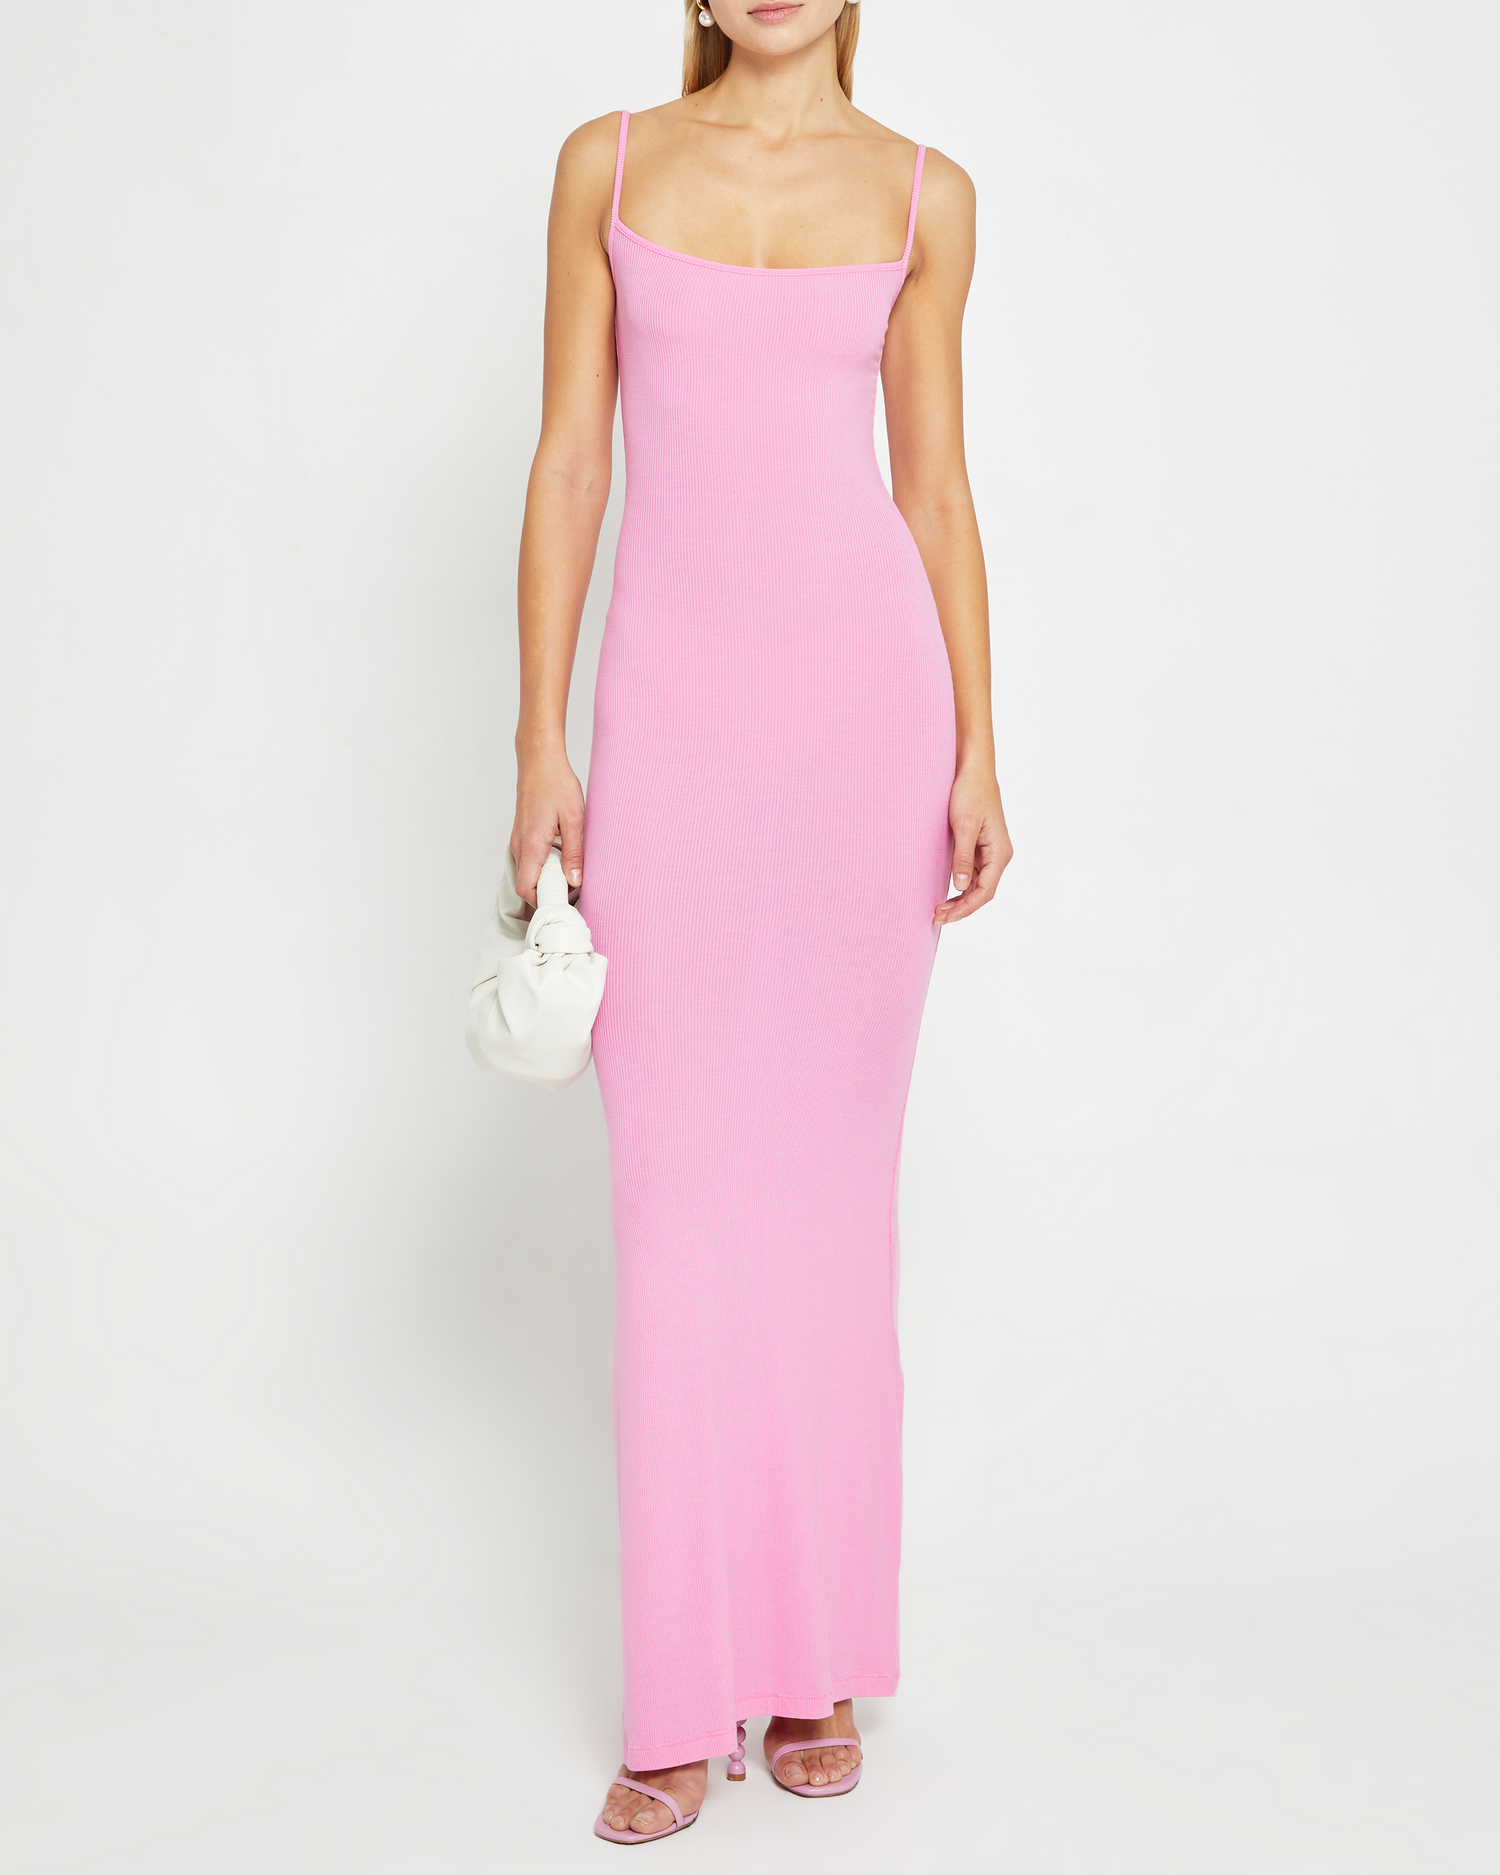 SKIMS Pink Soft Lounge Dress - $80 (33% Off Retail) - From Maddie